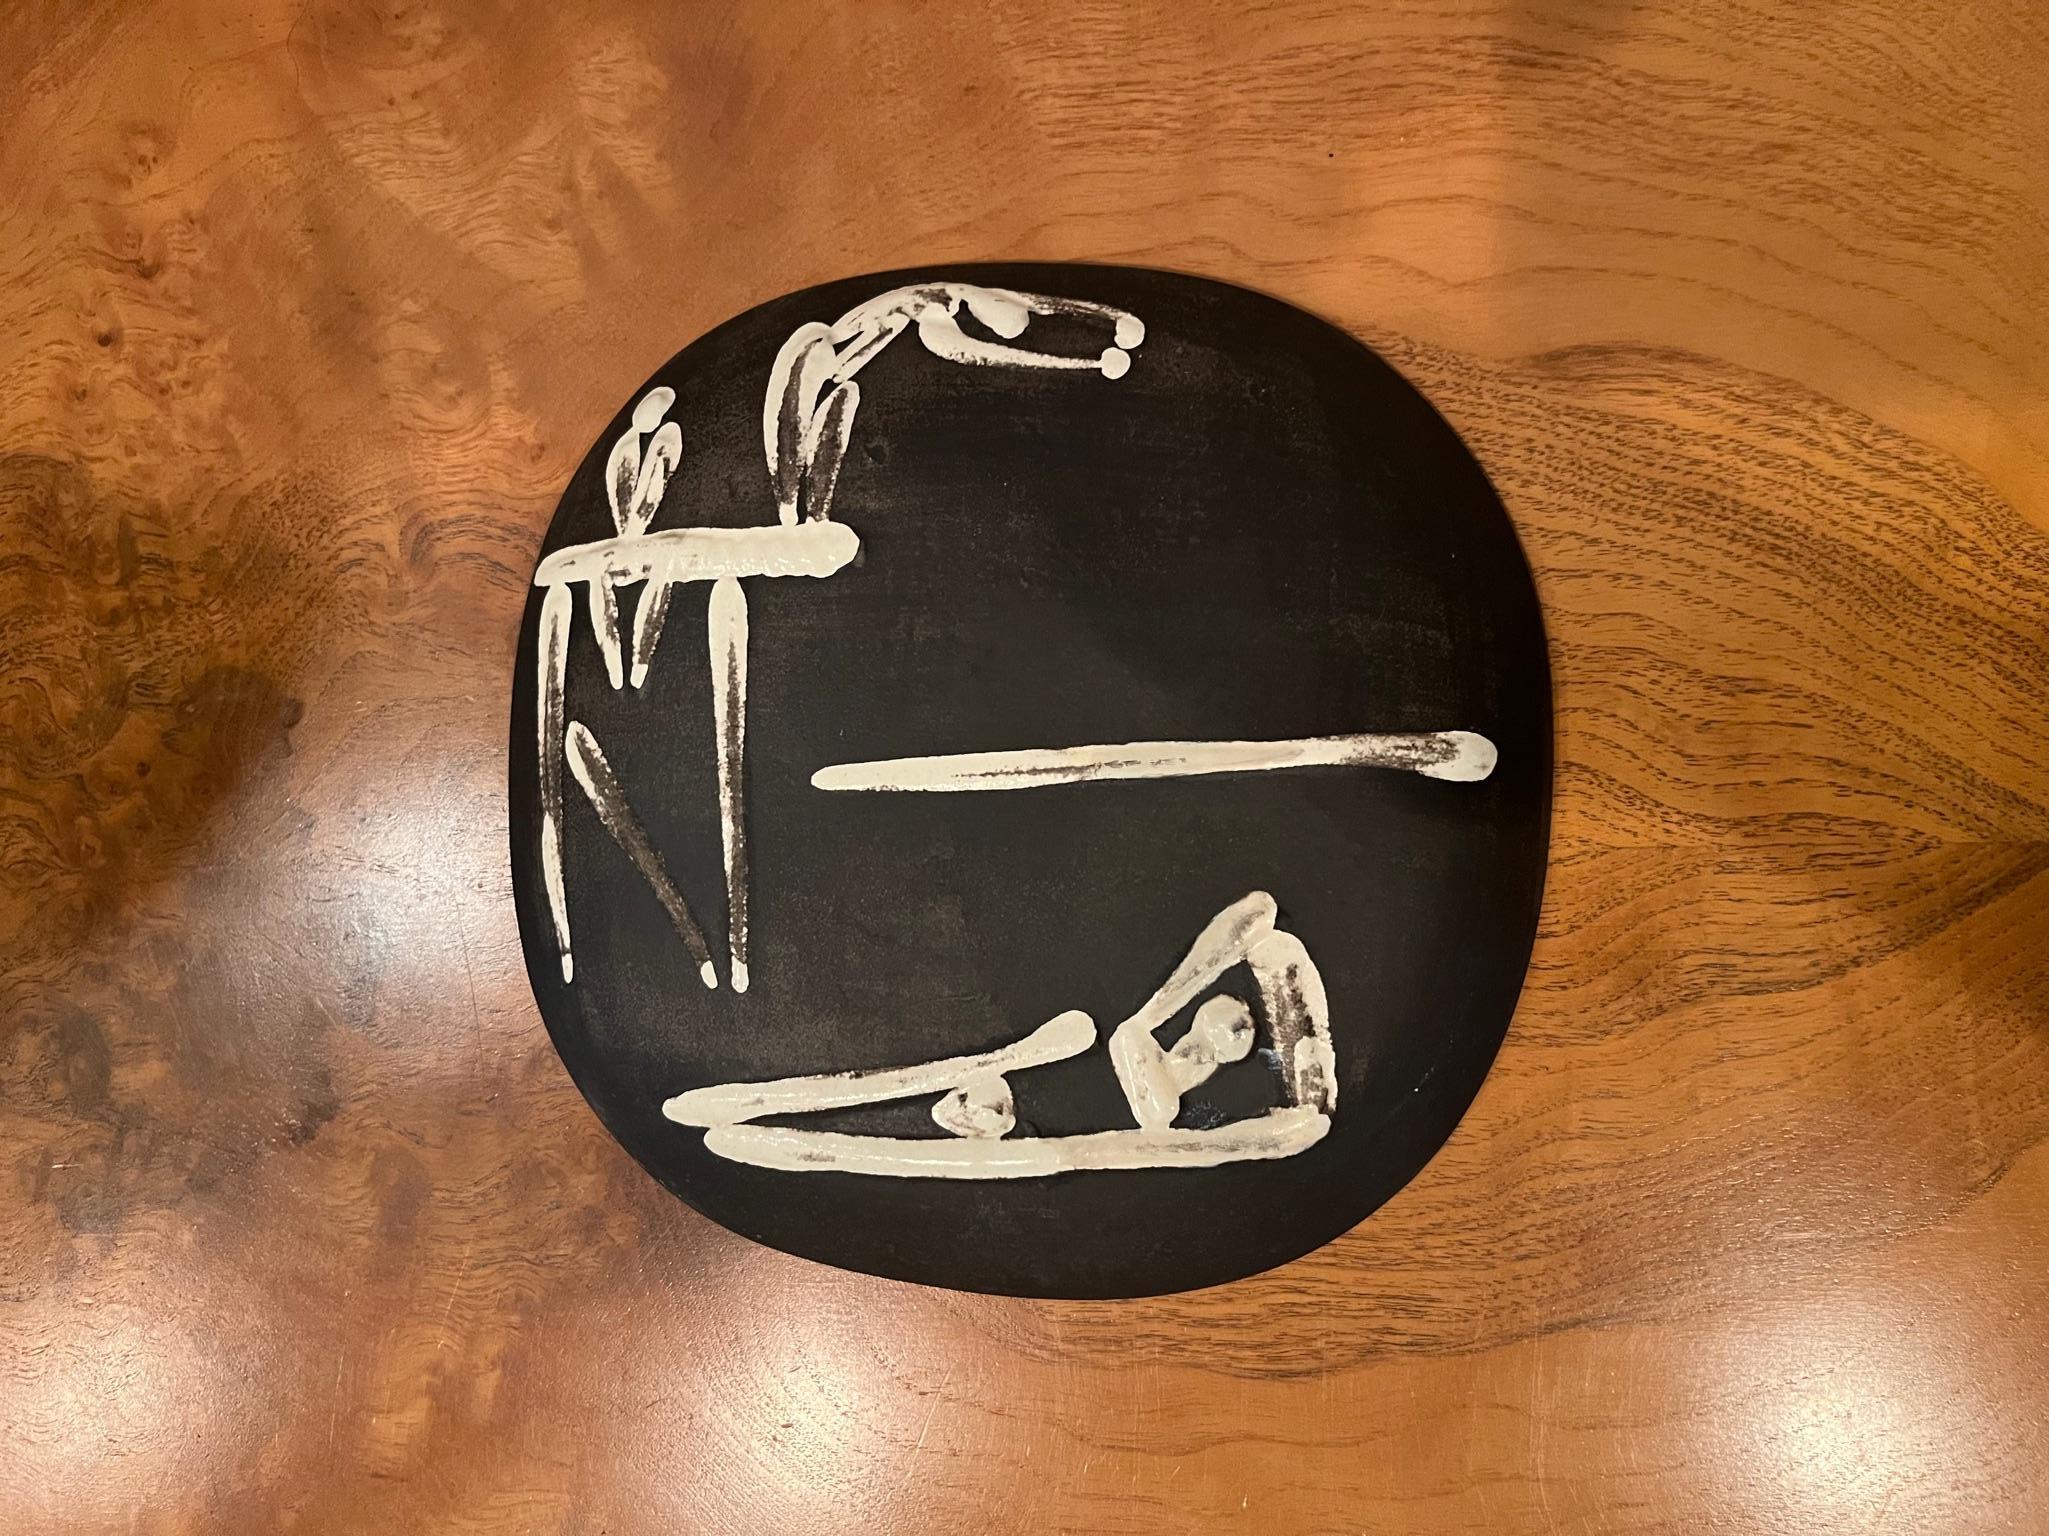 20th Century Pablo Picasso original signed limited edition Ceramic Plate, The Divers  1956 For Sale